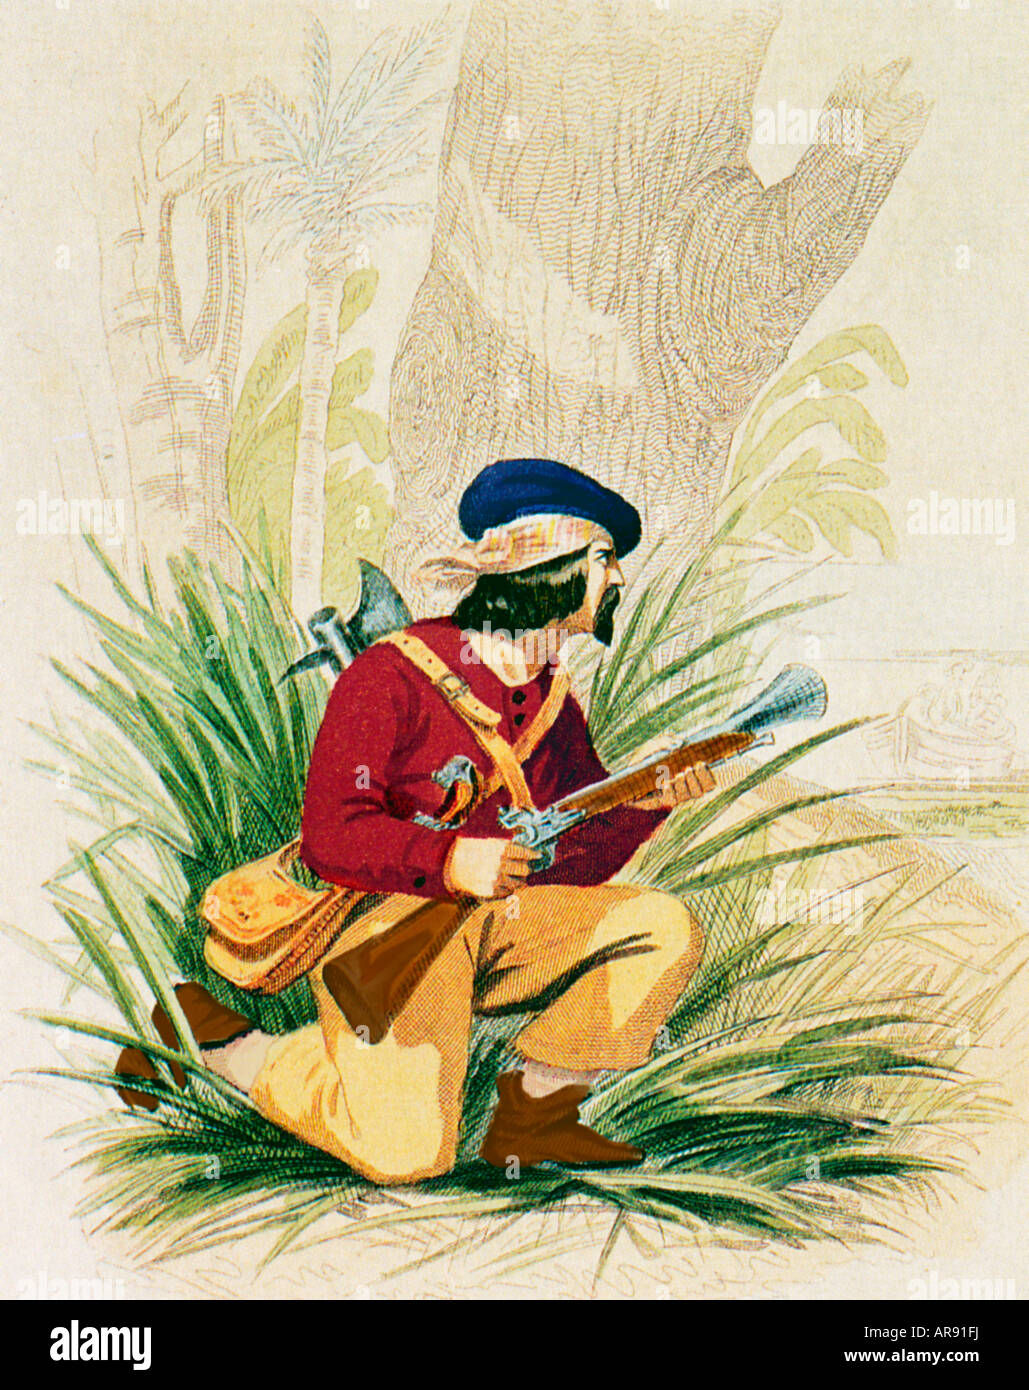 Buccaneer in Ambush 17th century illustration of a buccaneer armed with blunderbuss and boarding axe Stock Photo